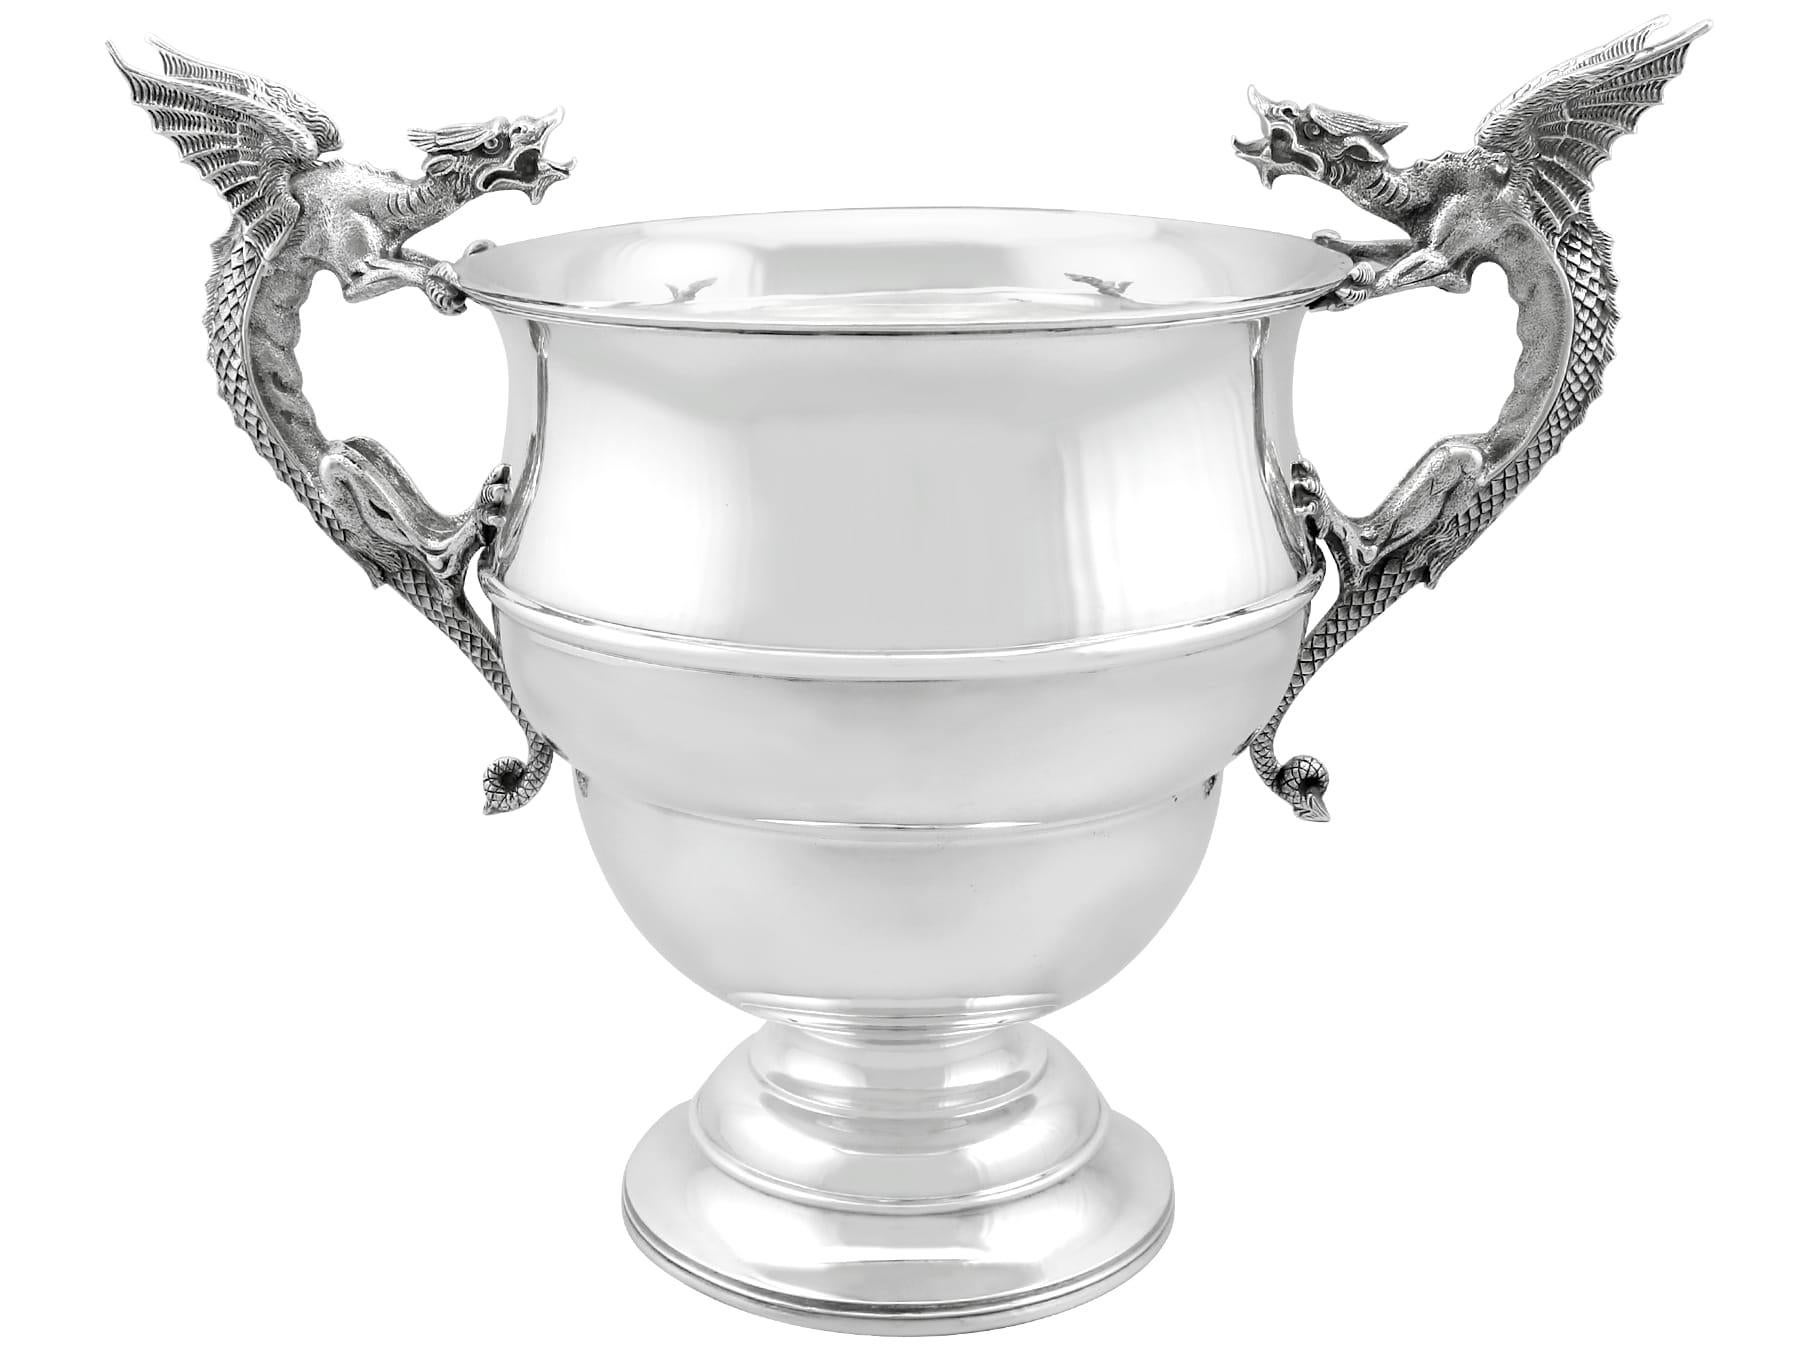 Antique Edwardian Sterling Silver Presentation Cup and Plinth (1906) For Sale 1